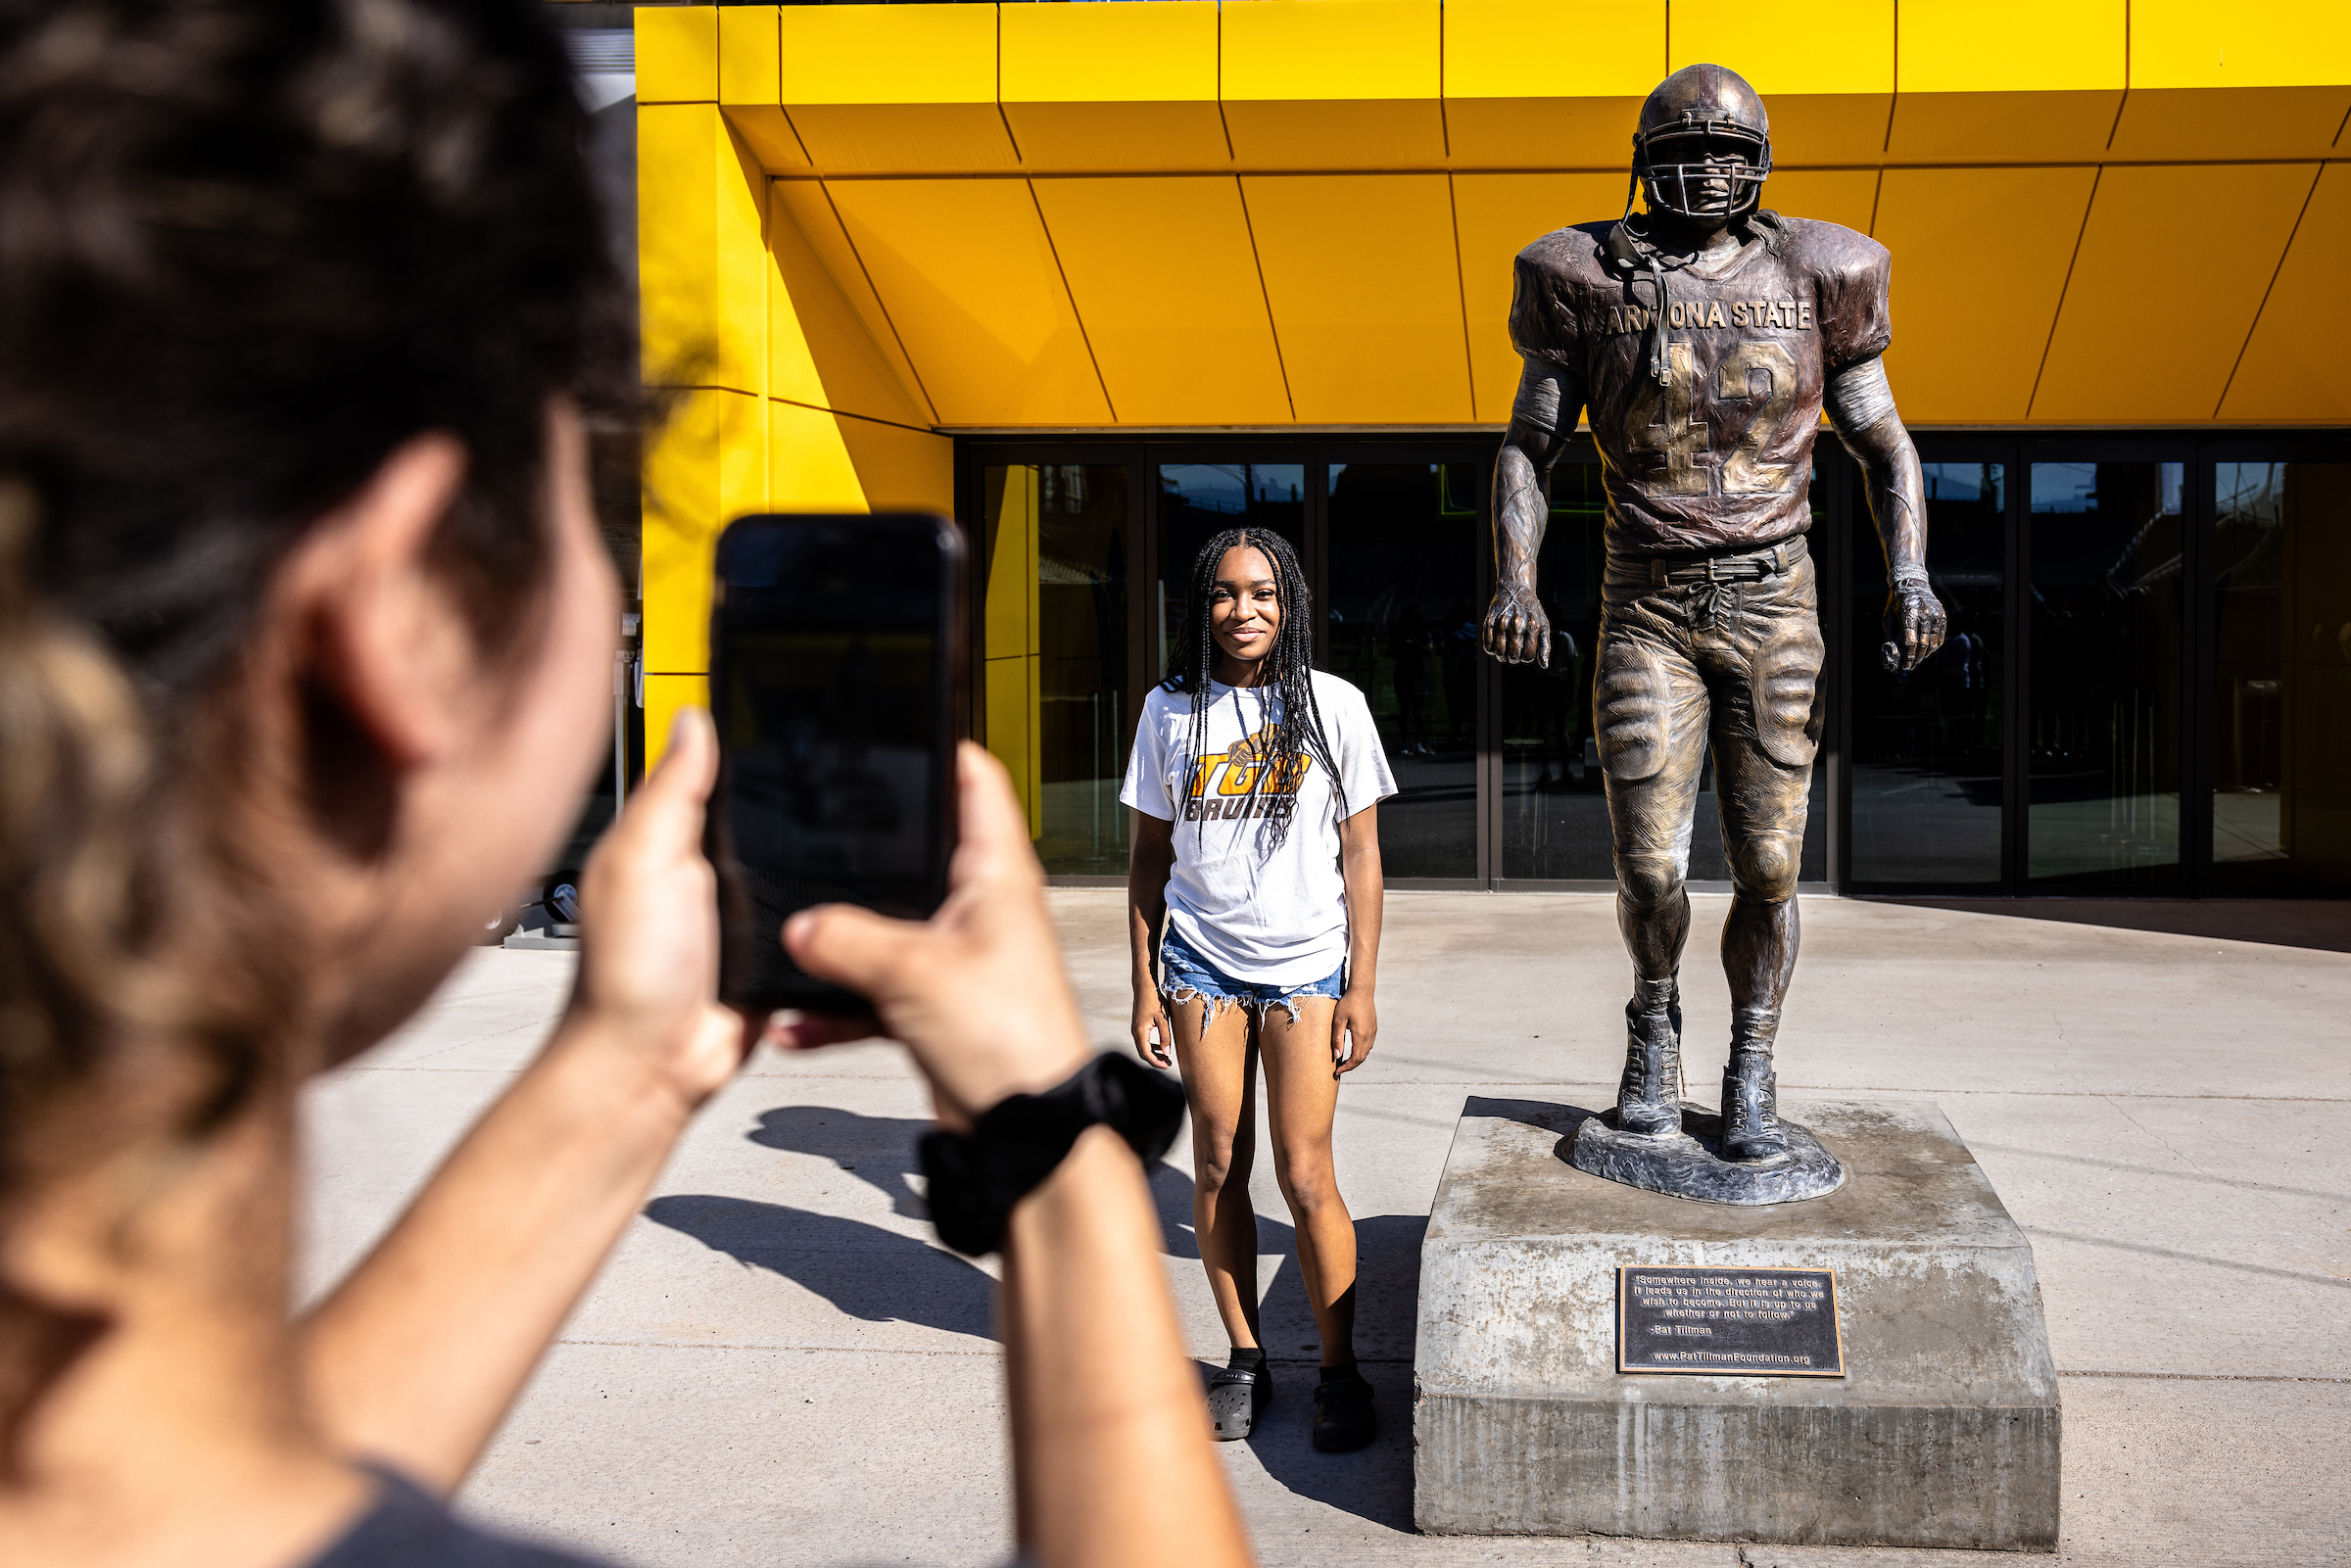 High school student taking a picture of her friend next to ASU's Pat Tillman statue